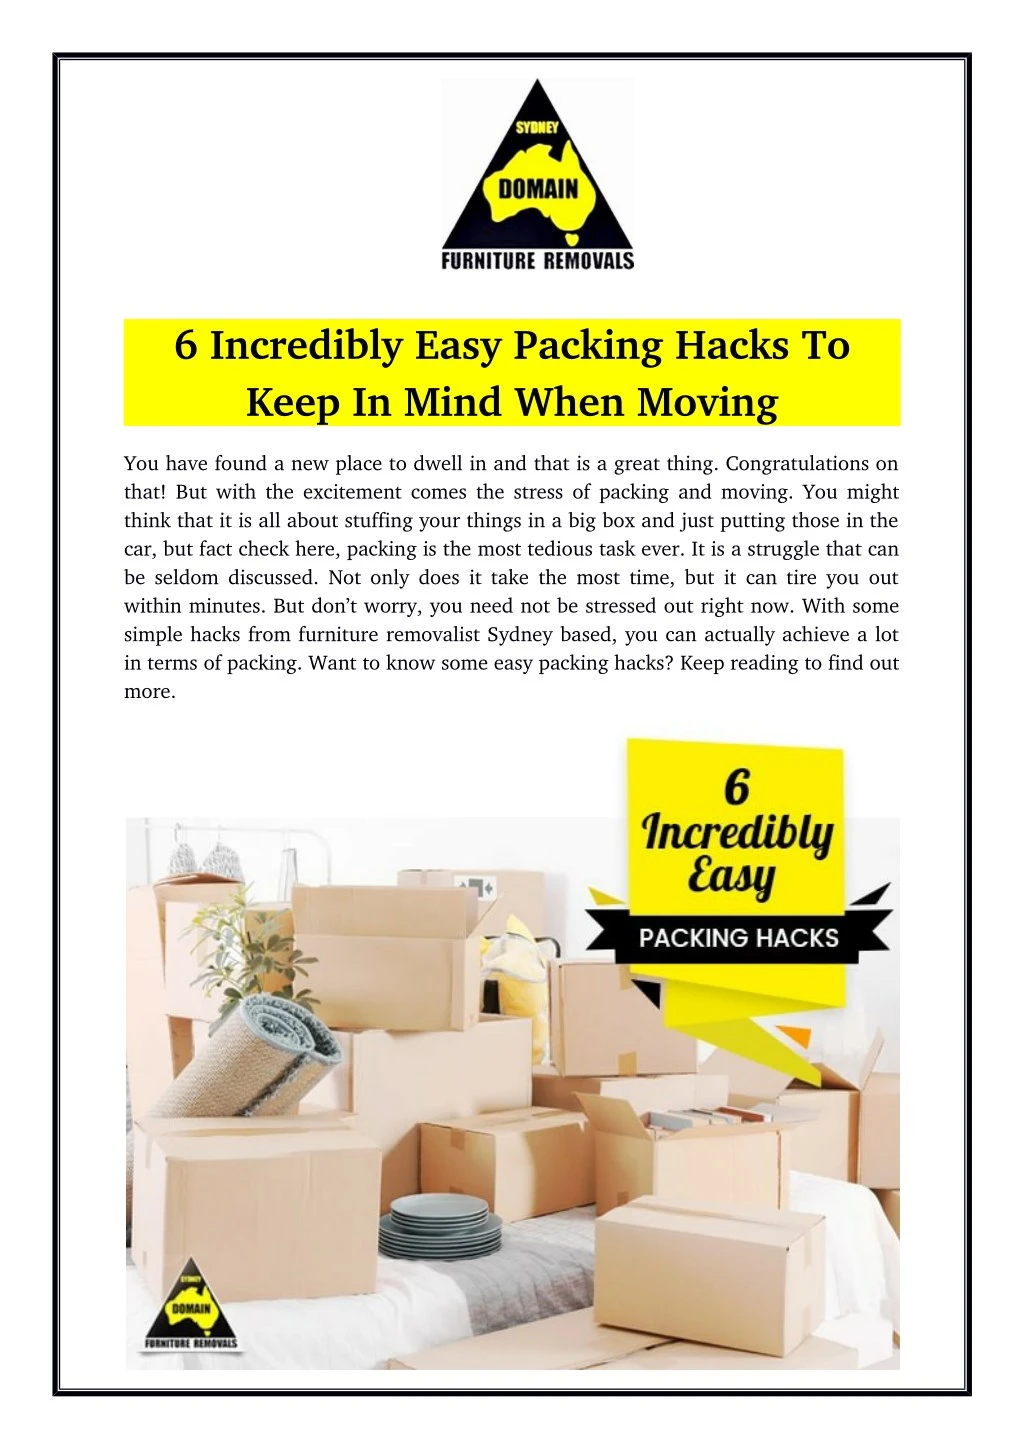 6 incredibly easy packing hacks to keep in mind